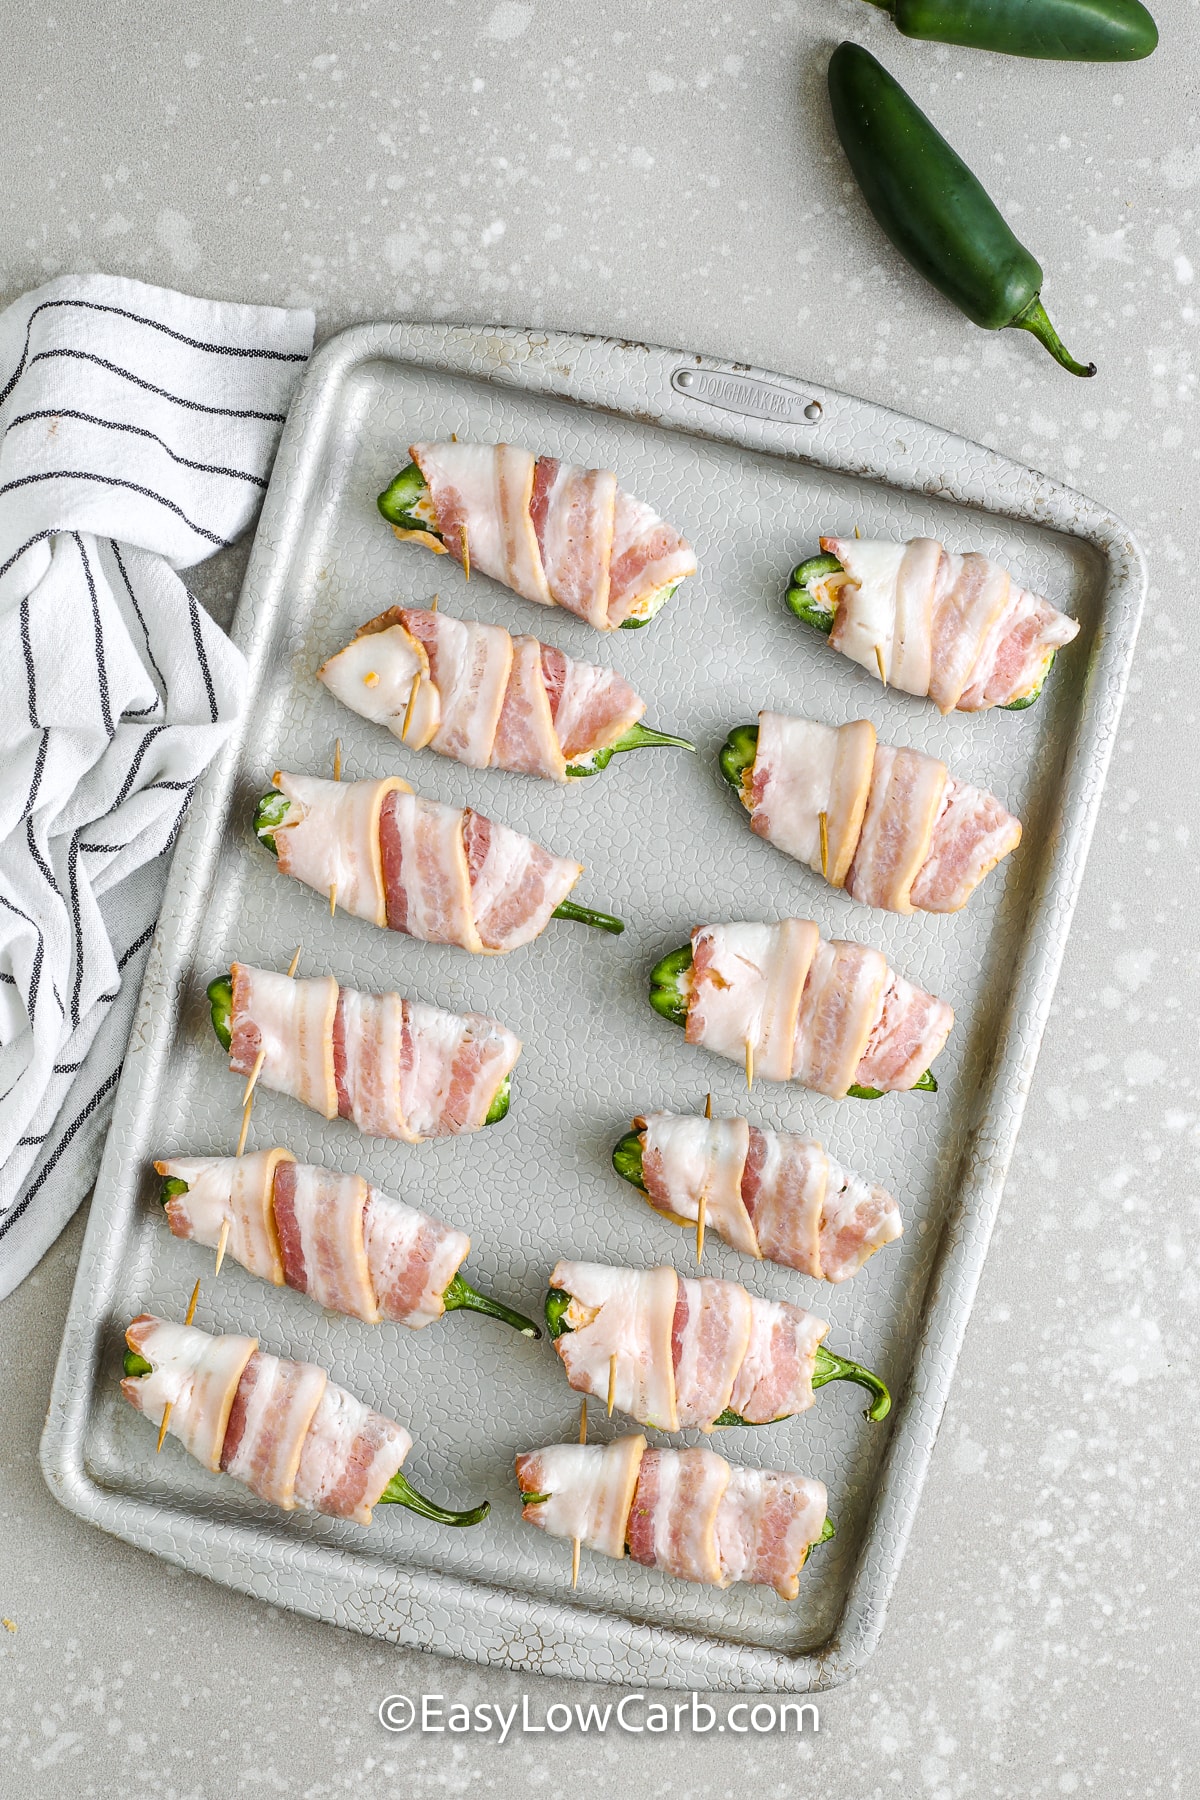 unbaked bacon wrapped jalapenos on a baking sheet